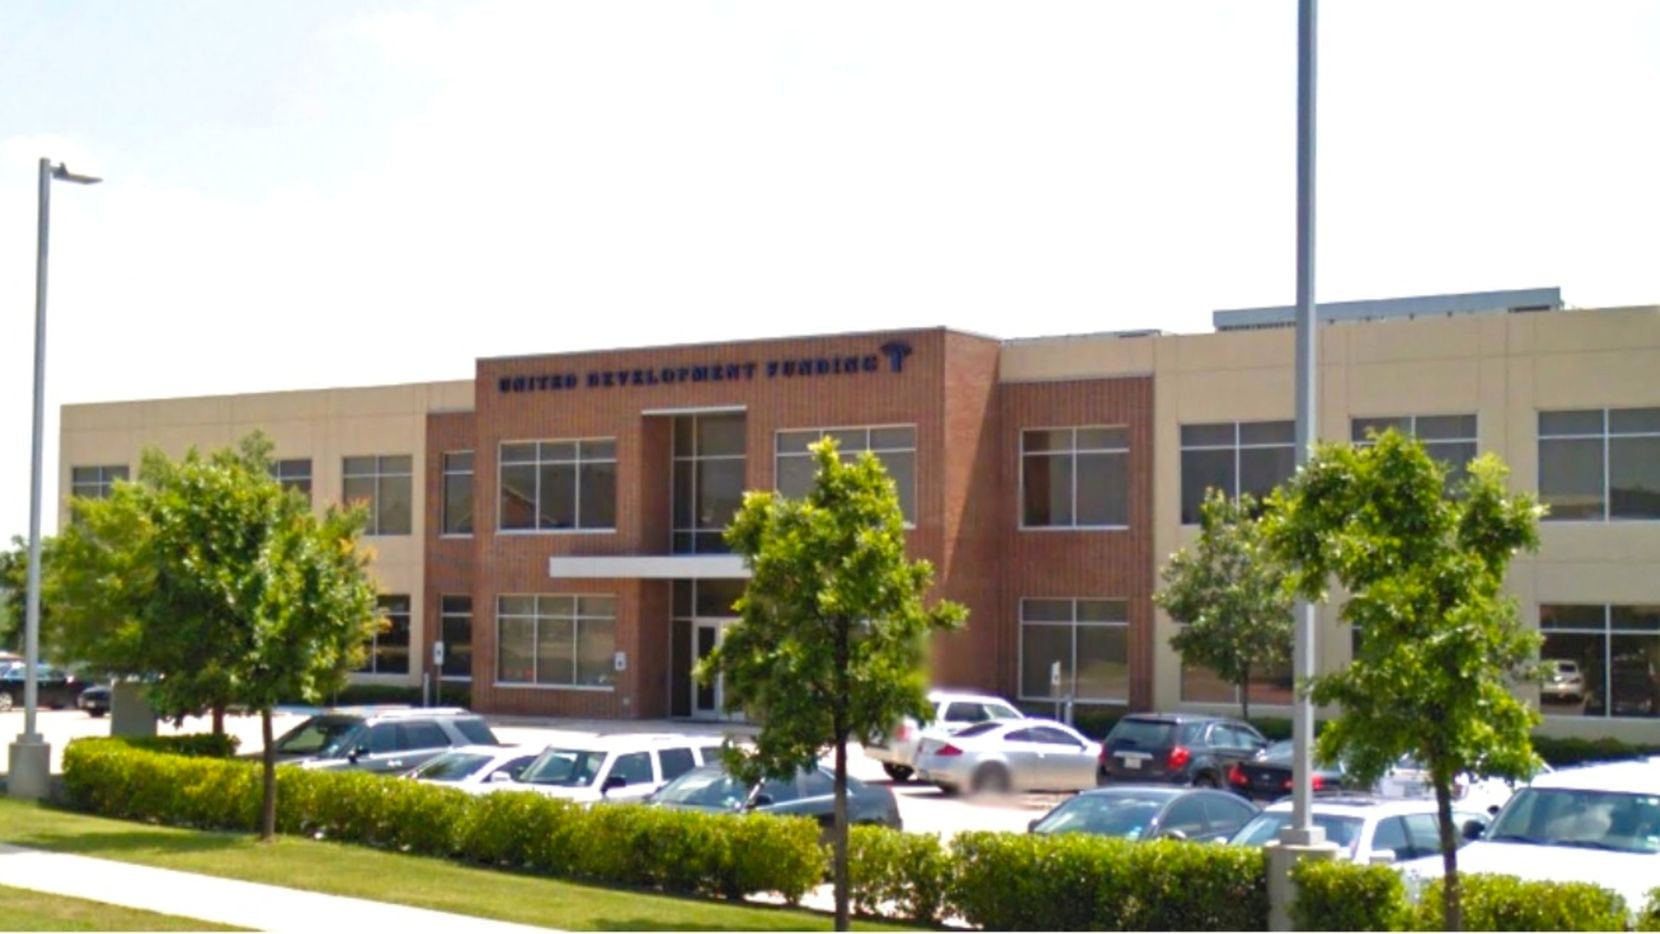 United Development Funding's offices in Grapevine, as shown in Google Street View.